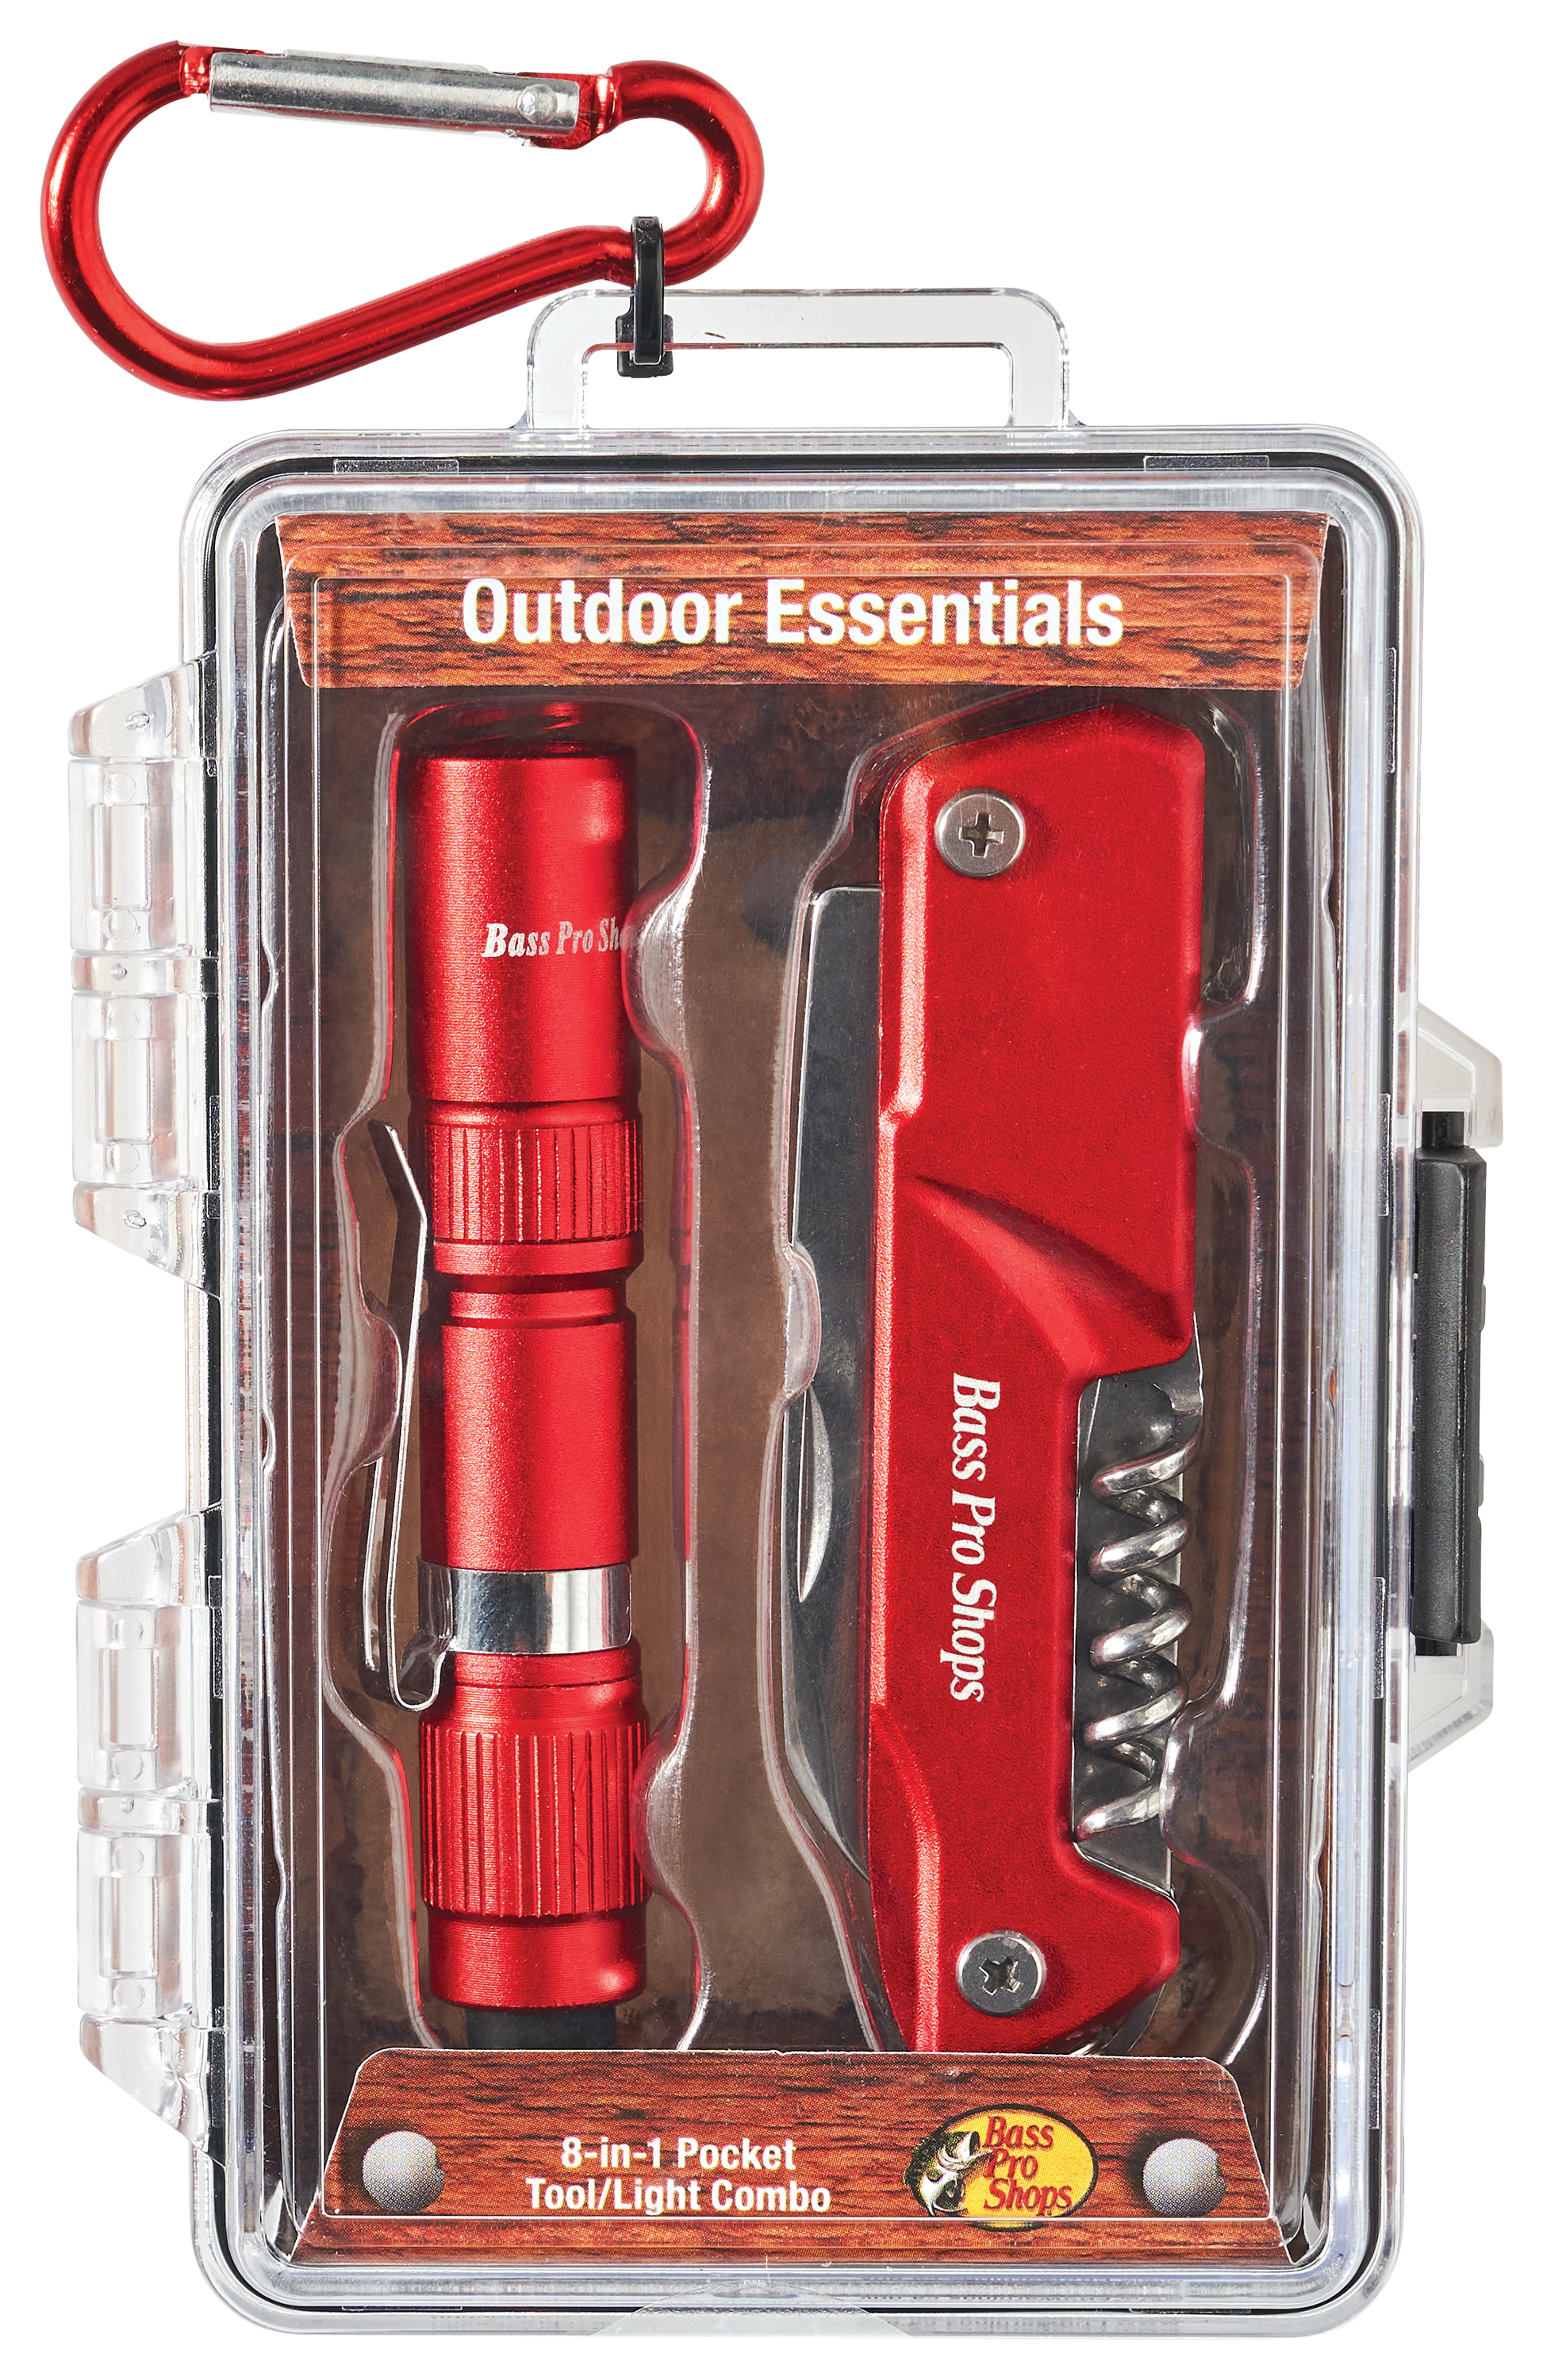 Bass Pro Shops Outdoor Essentials 8-in-1 Pocket Tool and Light